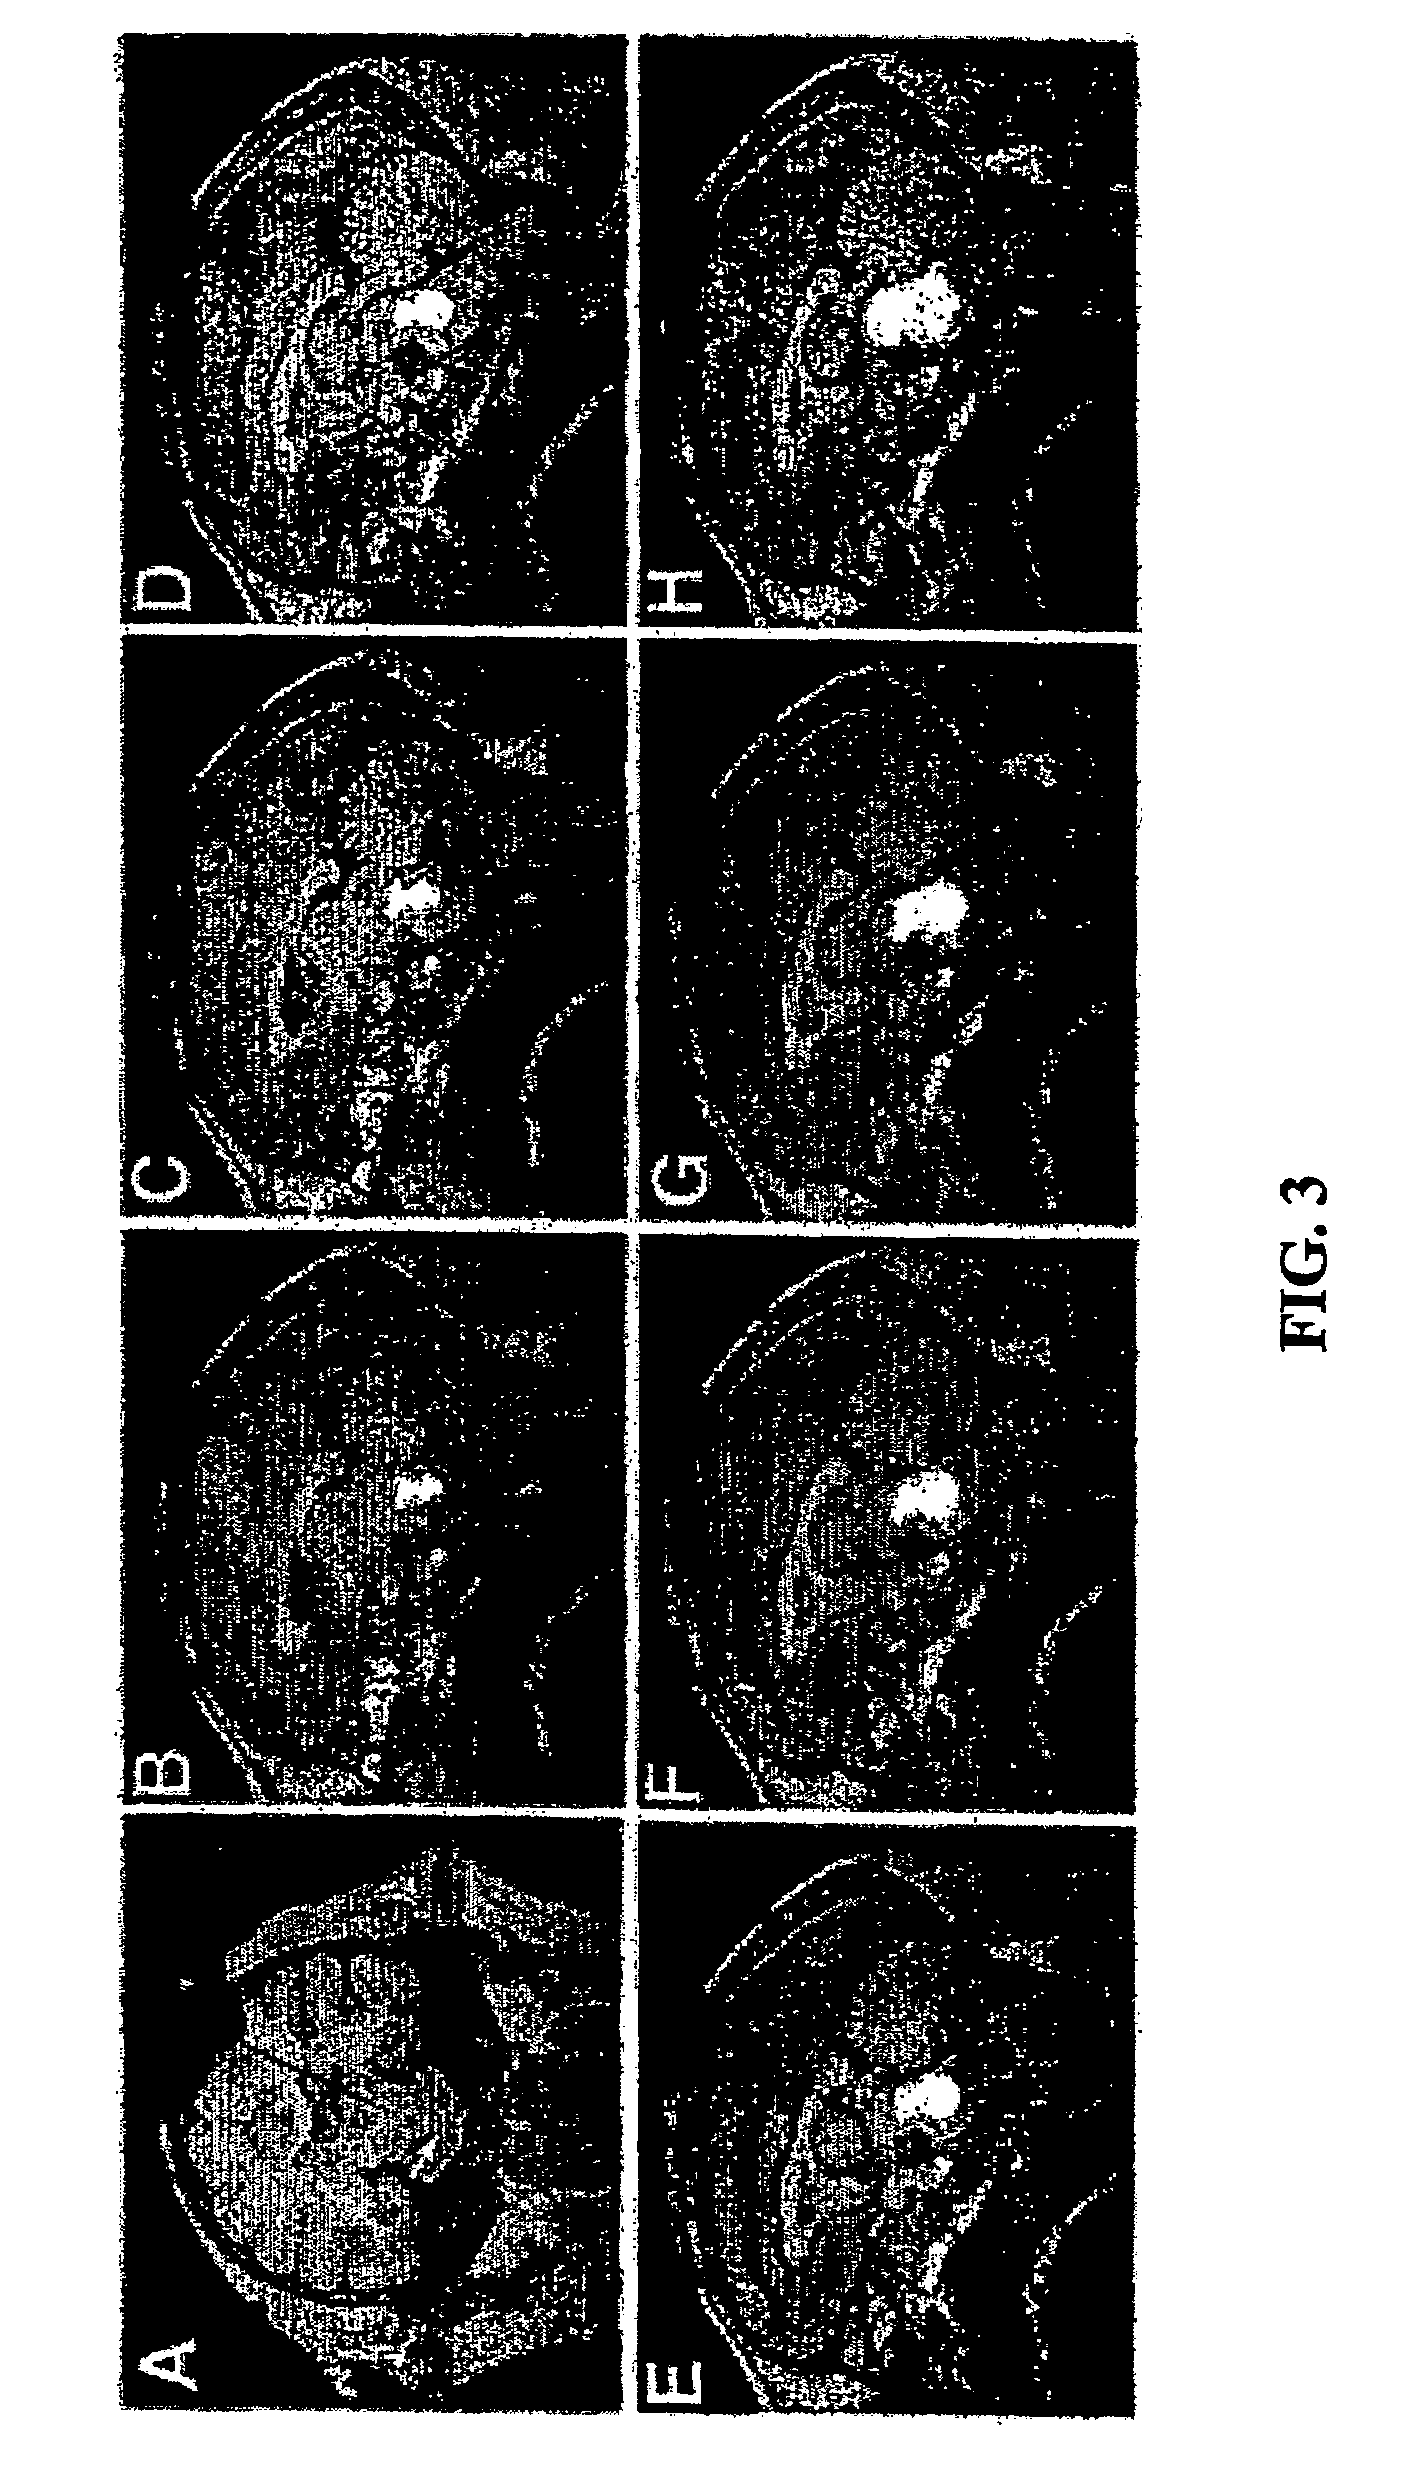 Method for convection enhanced delivery of therapeutic agents